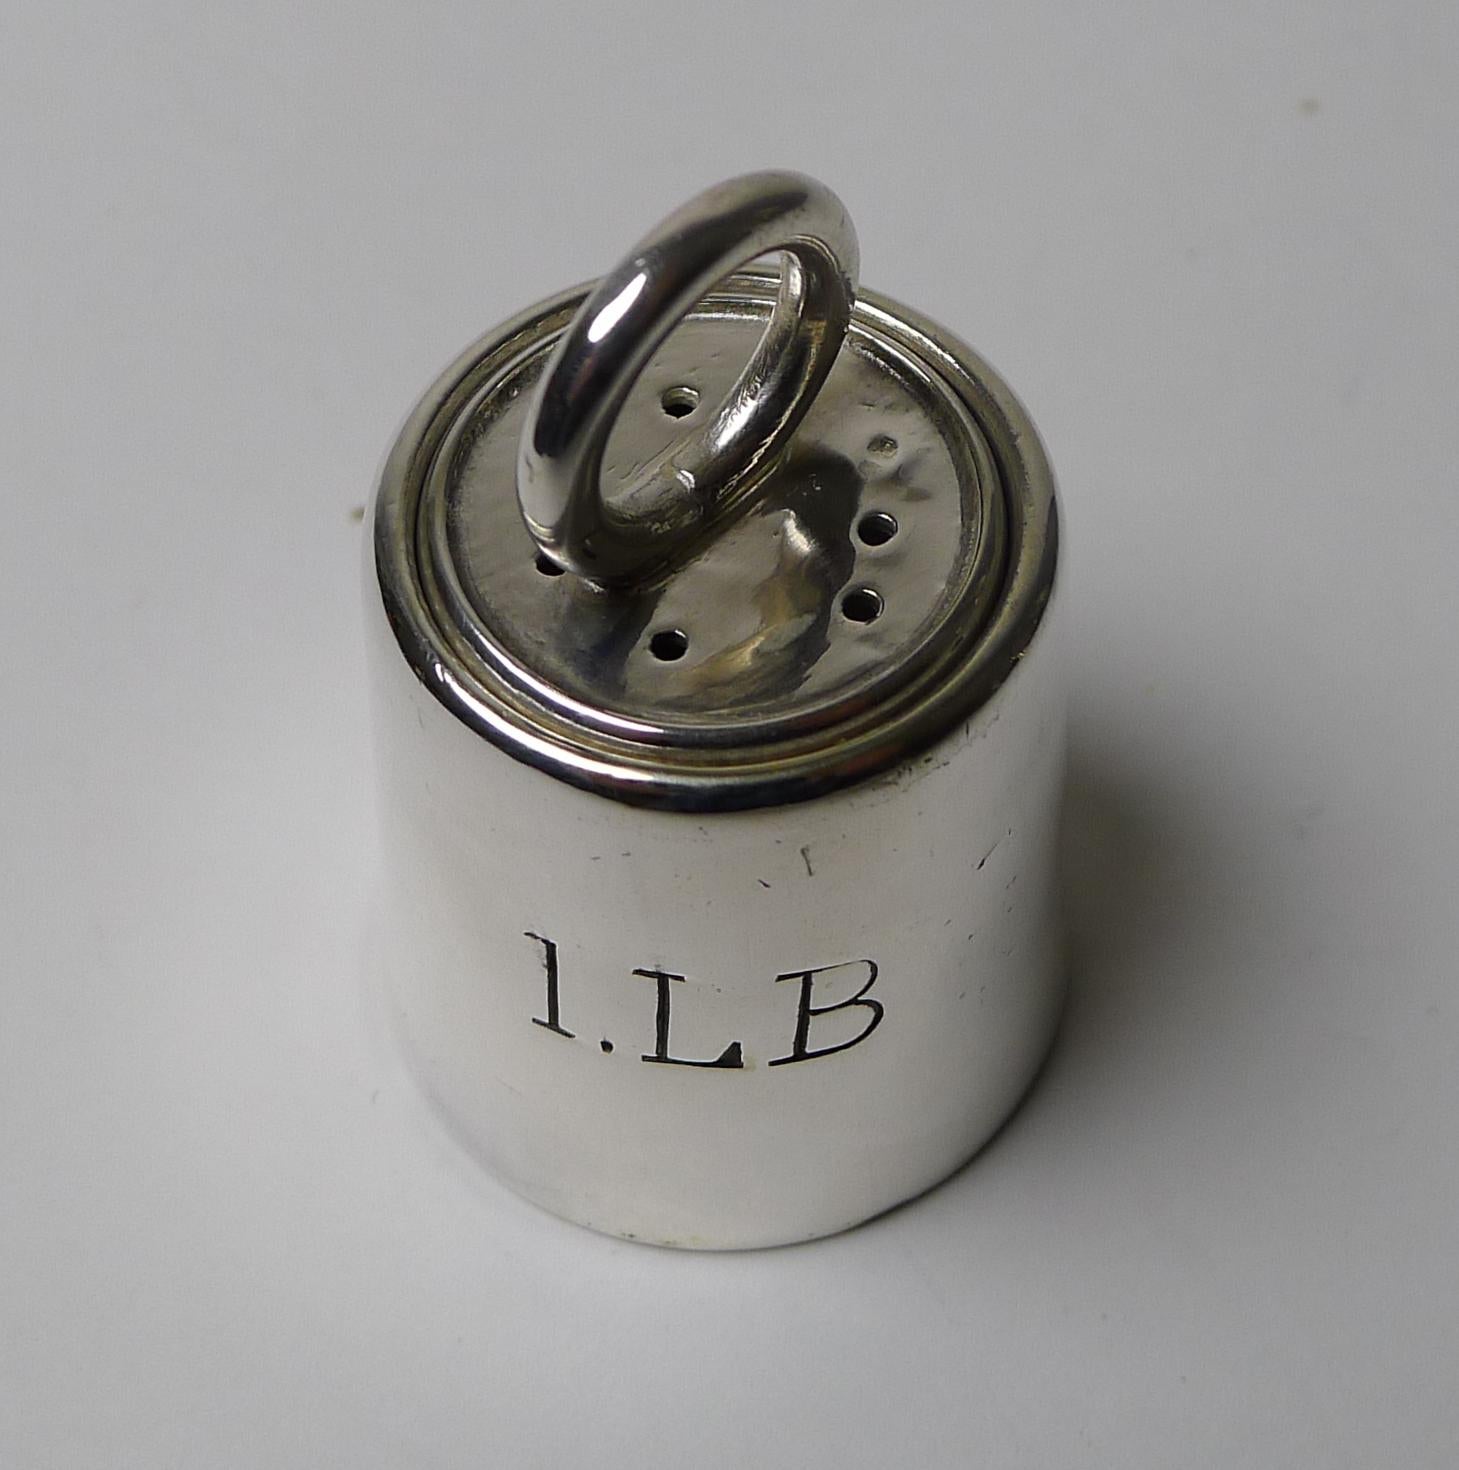 A fabulous and rare little pepper pot or pepperette by the top-notch English silversmith, Mappin and Webb.

Of course what makes this a rare piece is the it being in the form of a one pound weight . It is lovely quality to be expected by such an